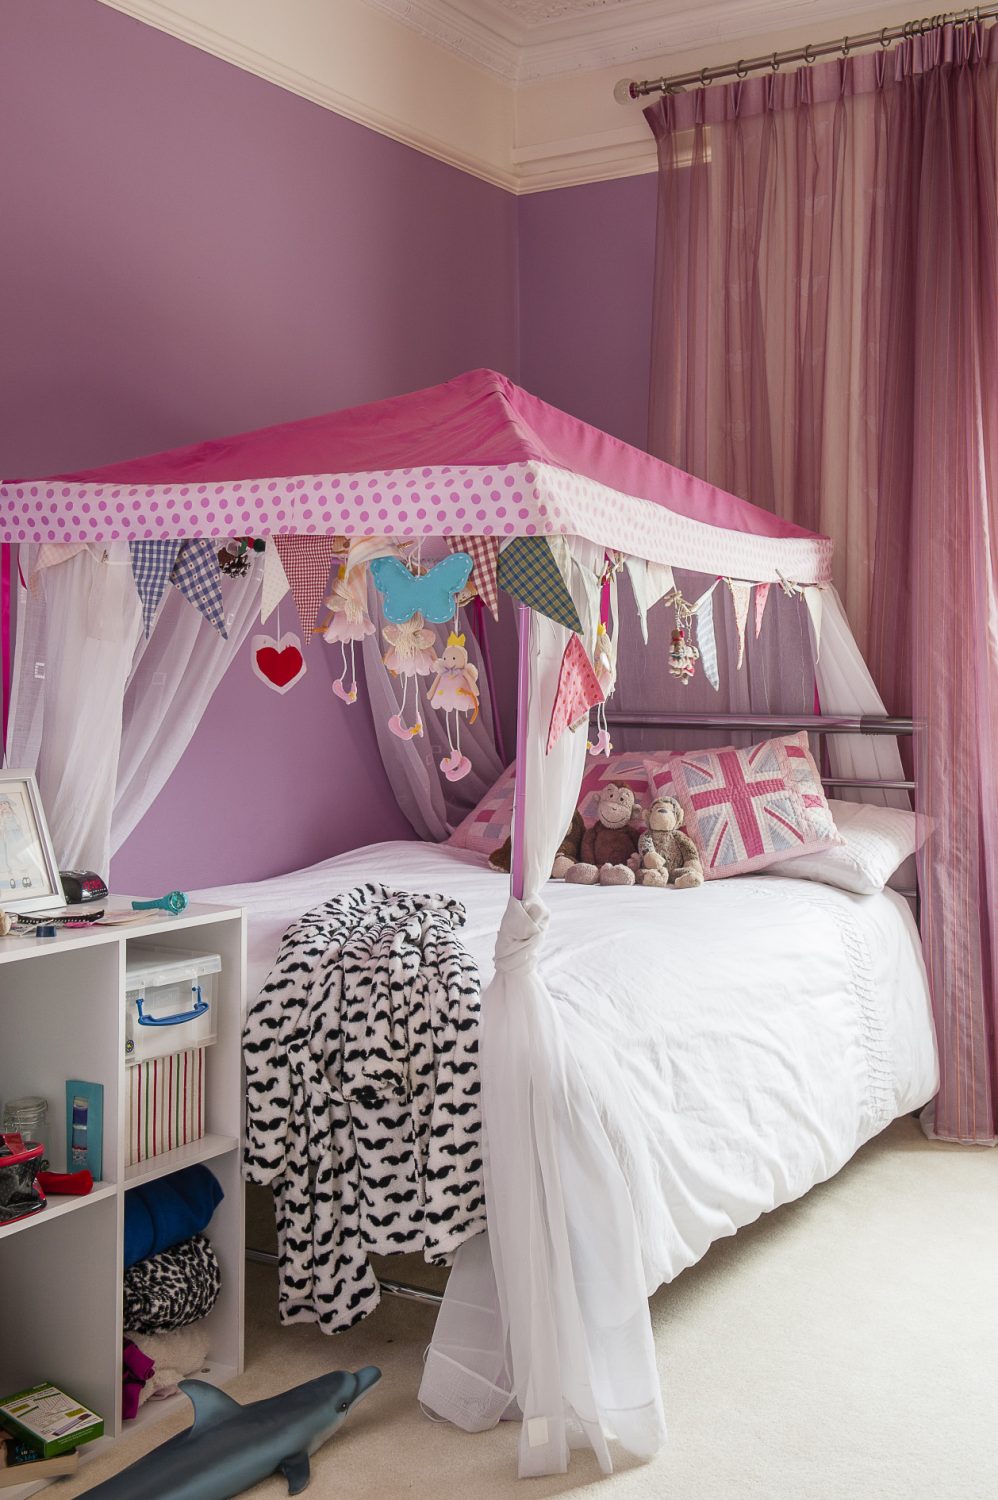 Daughter Katie’s room is a paradise of pink and purple, complete with bunk beds to make it an ideal room for girly sleepovers